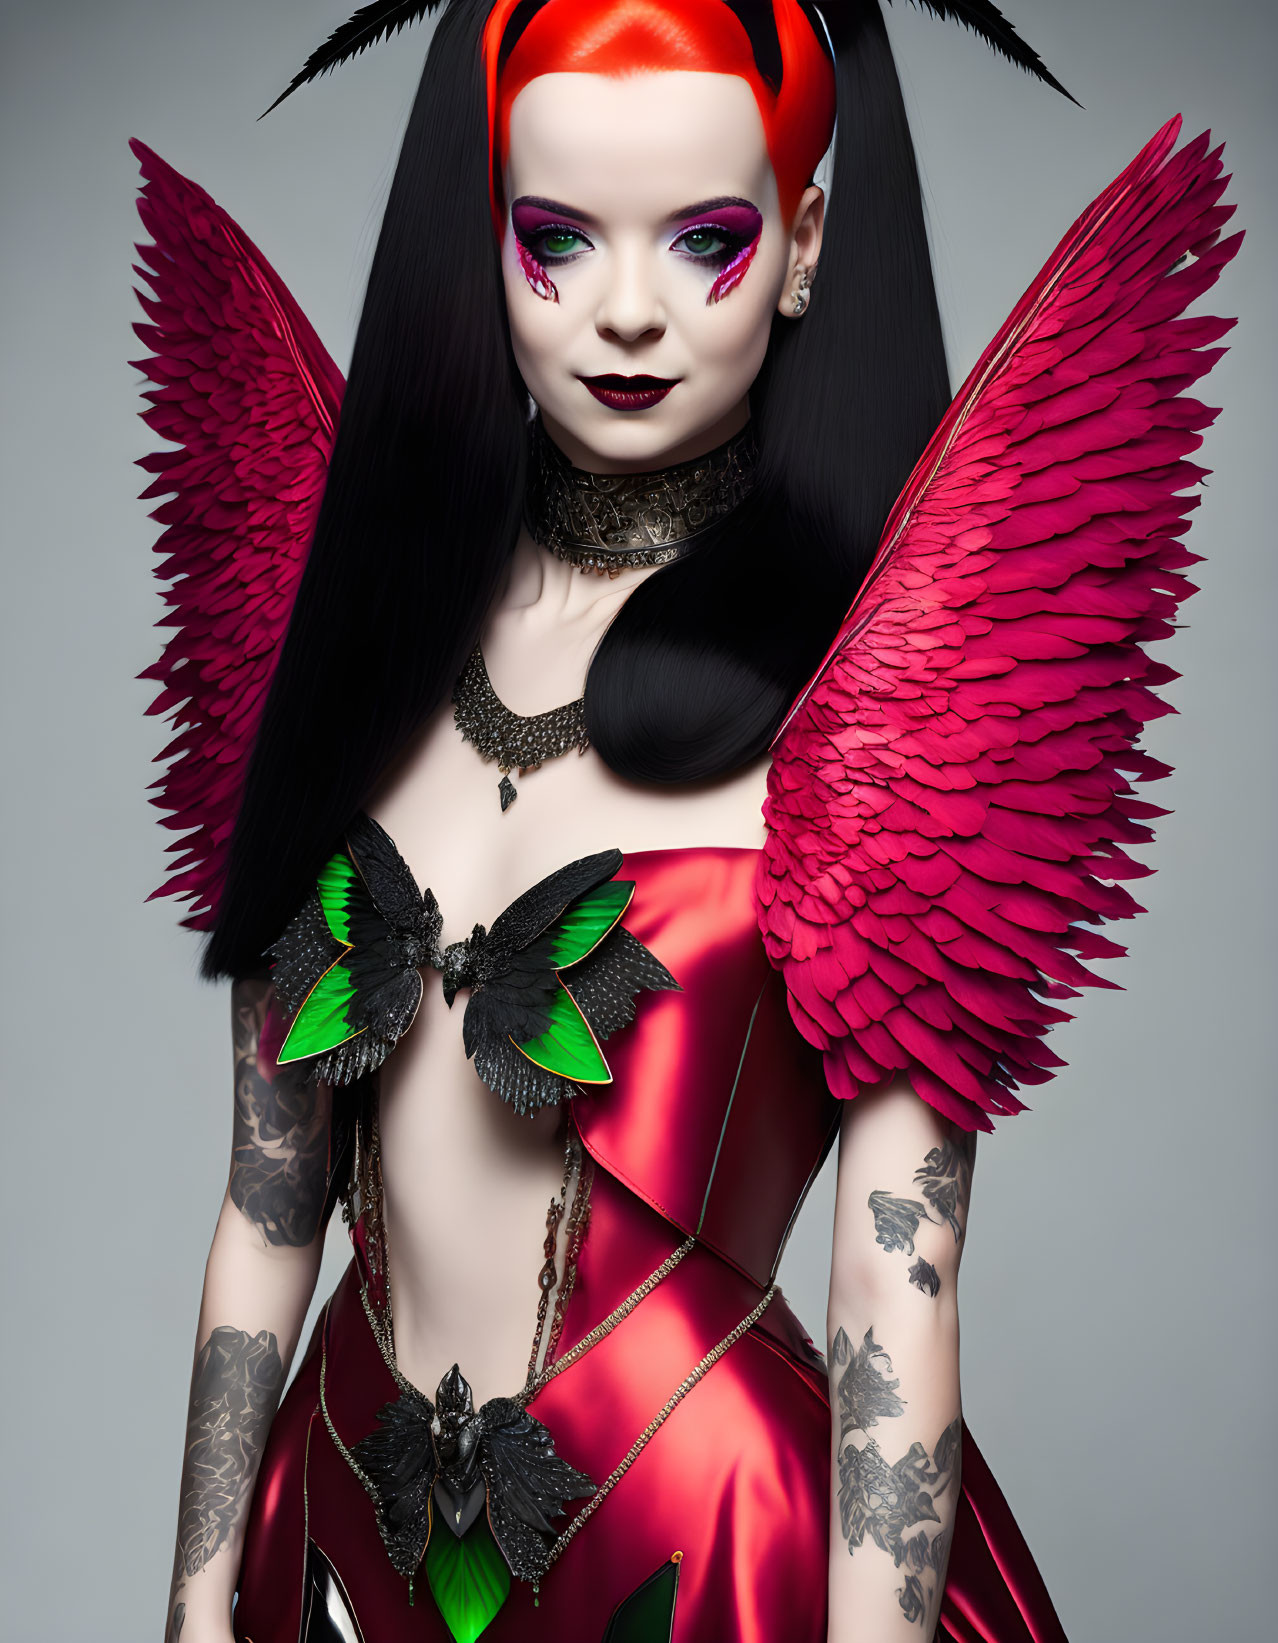 Vibrant red and black hair, butterfly bodysuit, tattoos, and feathered wings.